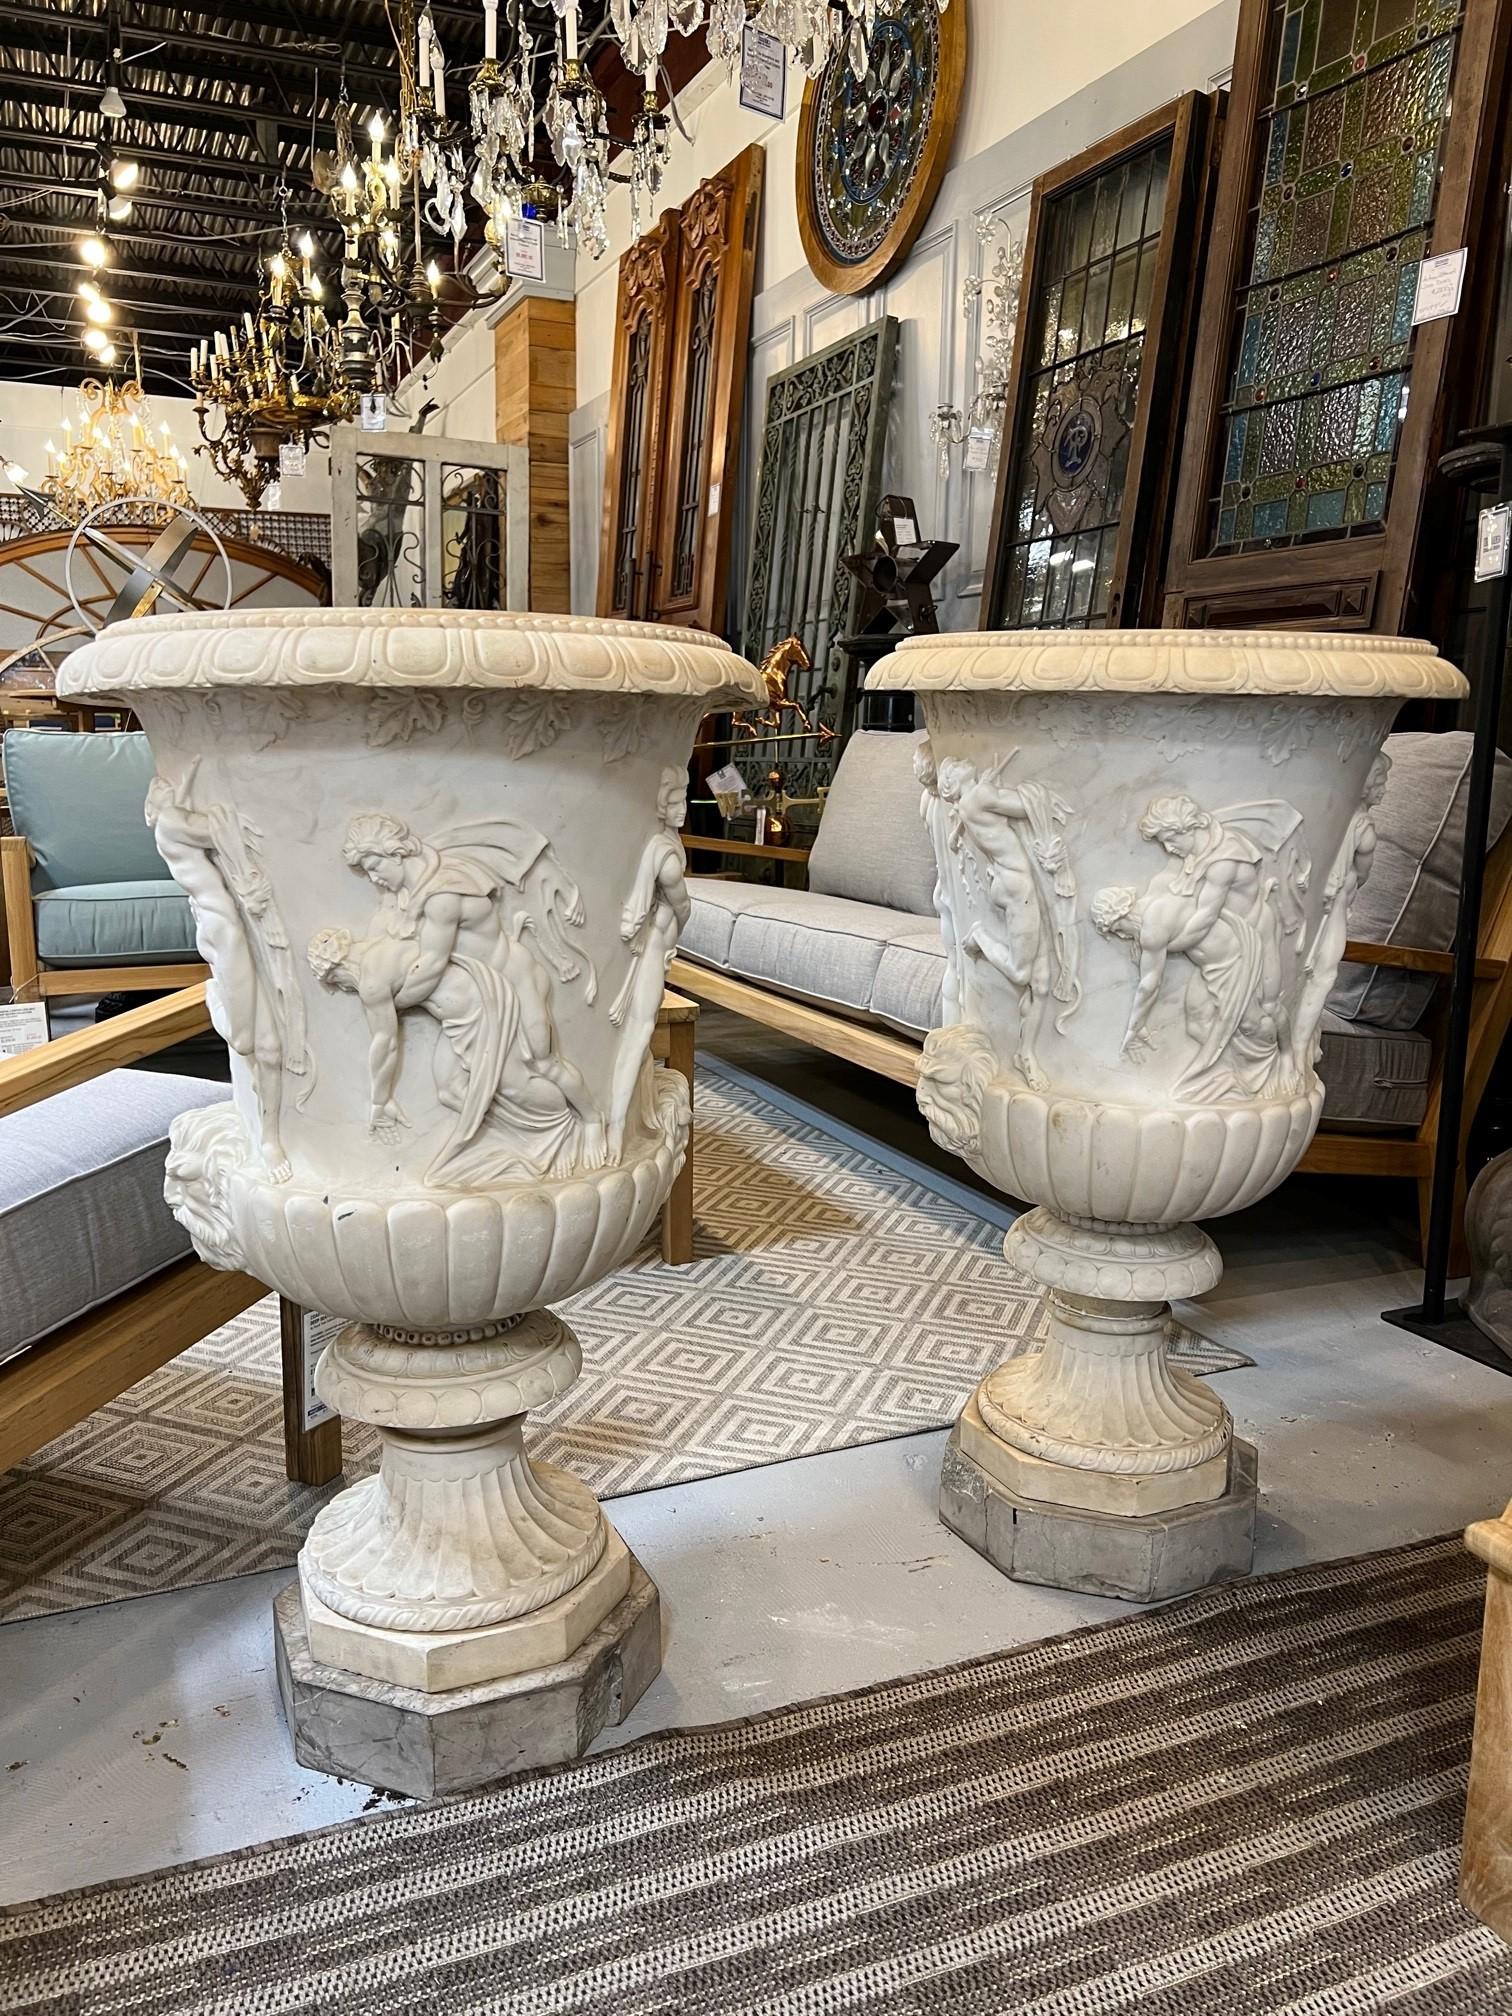 A very fine and exceptionally handed carved pair of Italian Early 20th century marble urns. A great size and intricately designed with male and female figures dancing and playing musical instruments, the details are amazing. The marble urns are each